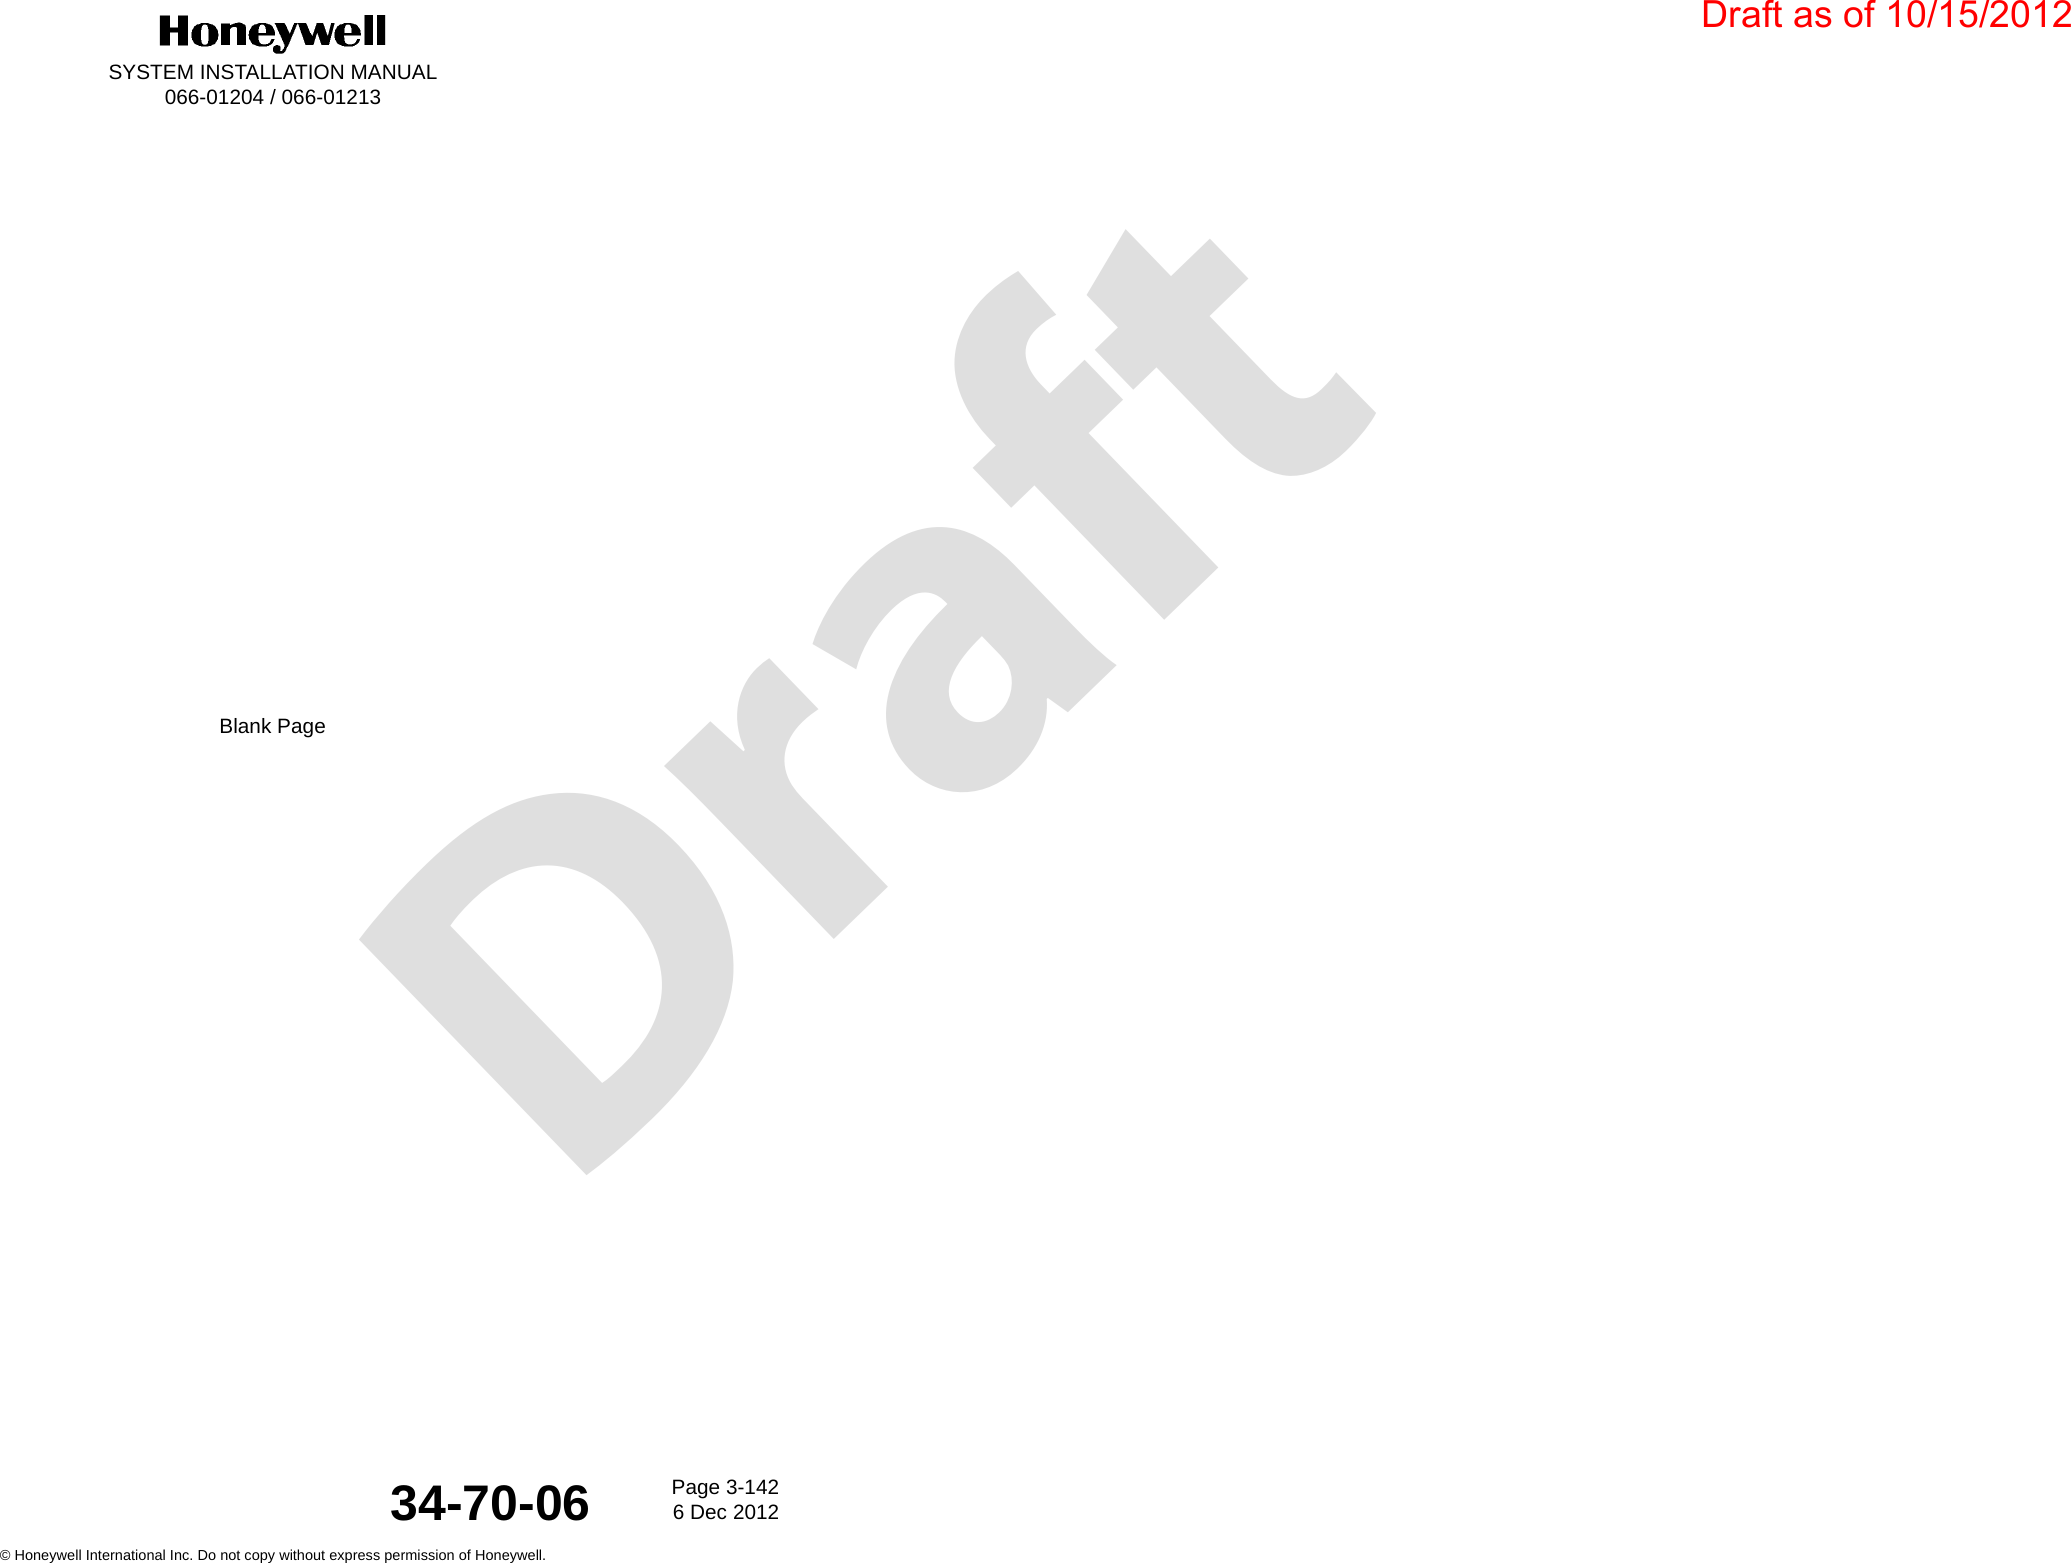 DraftSYSTEM INSTALLATION MANUAL066-01204 / 066-01213Page 3-1426 Dec 2012© Honeywell International Inc. Do not copy without express permission of Honeywell.34-70-06Blank PageDraft as of 10/15/2012